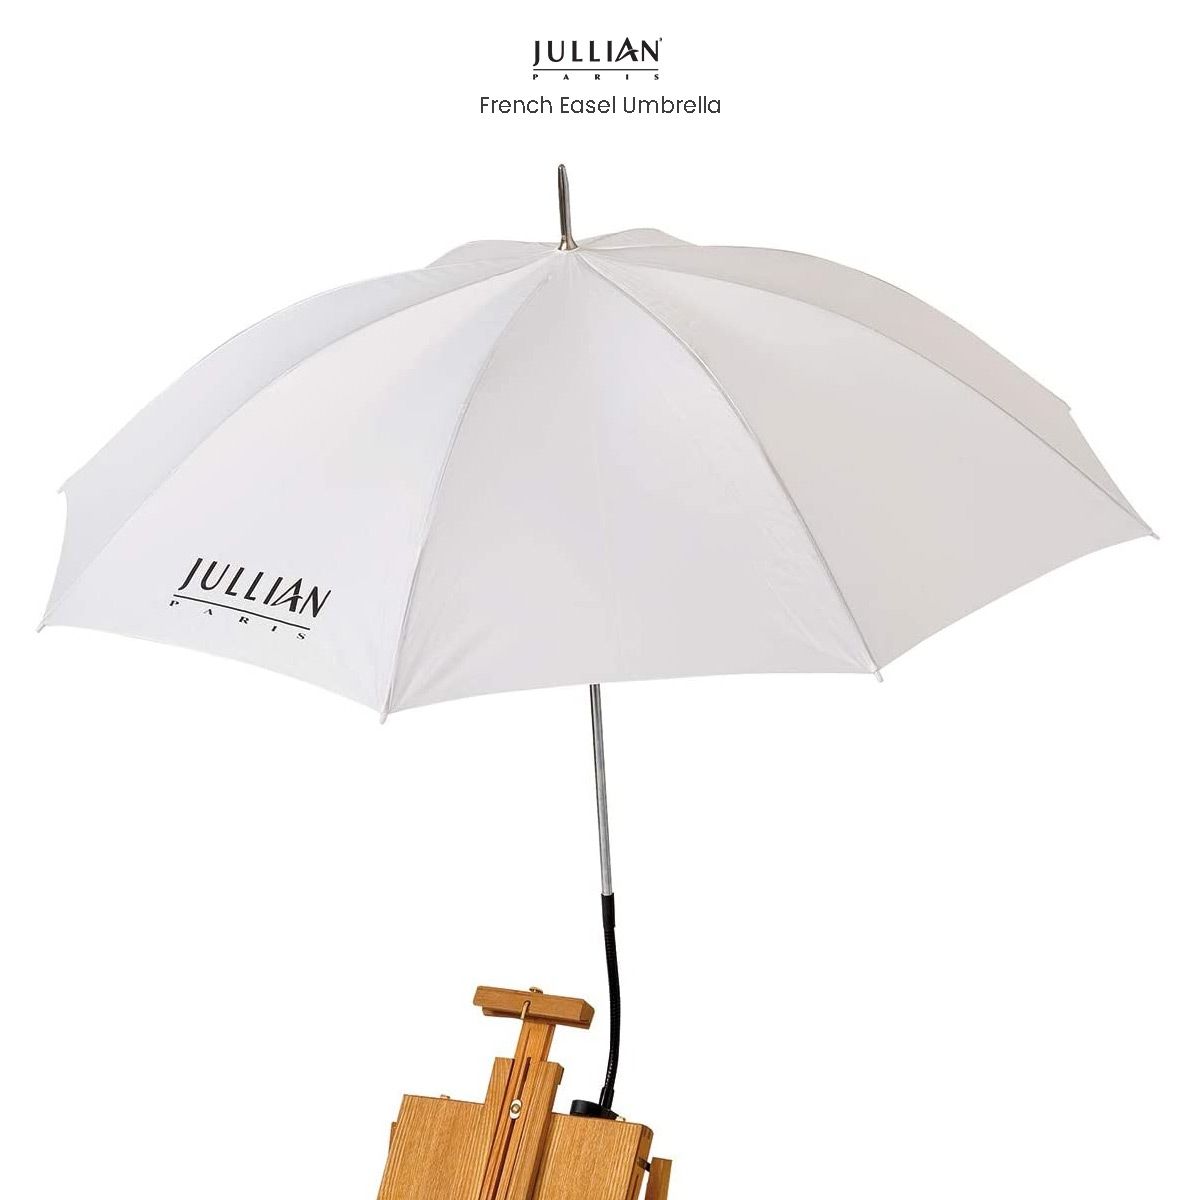 Jullian French Easel Umbrella White - Adjustable Clamps To the Easel